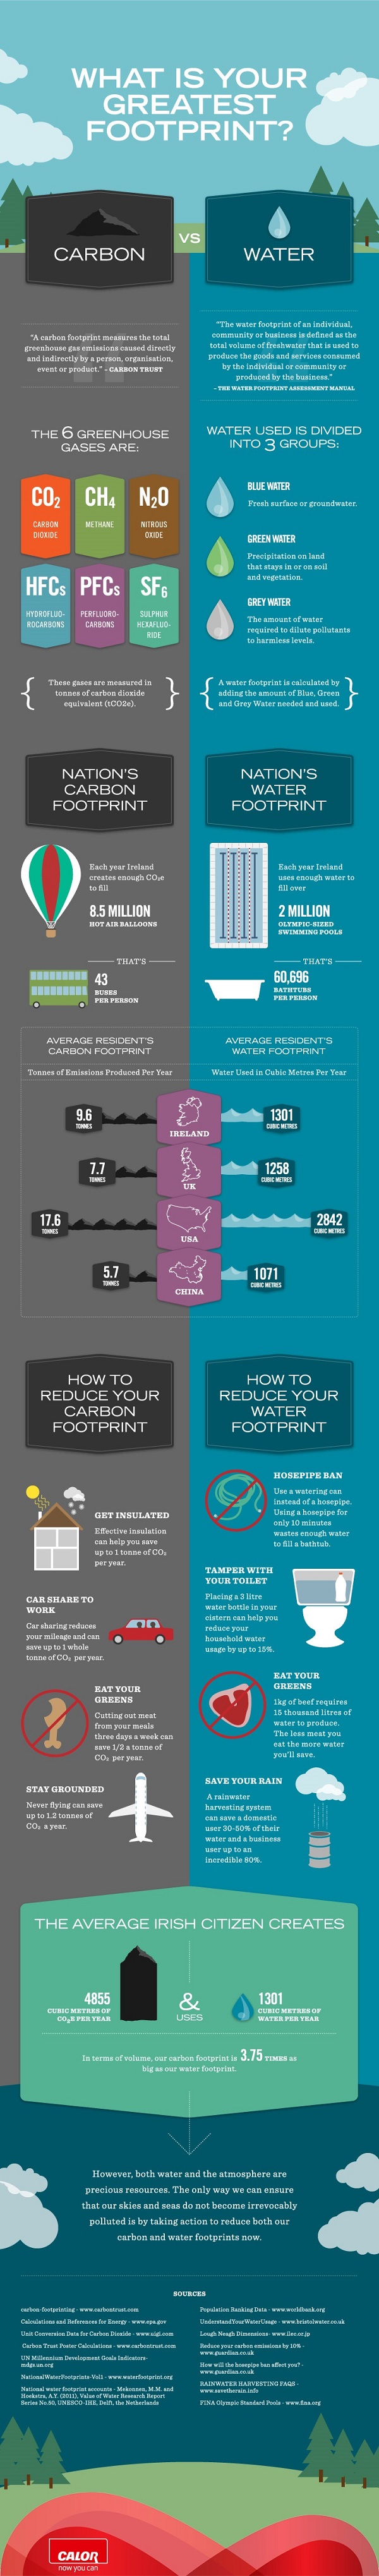 What Is Your Greatest Footprint? (Carbon vs. Water) Infographic